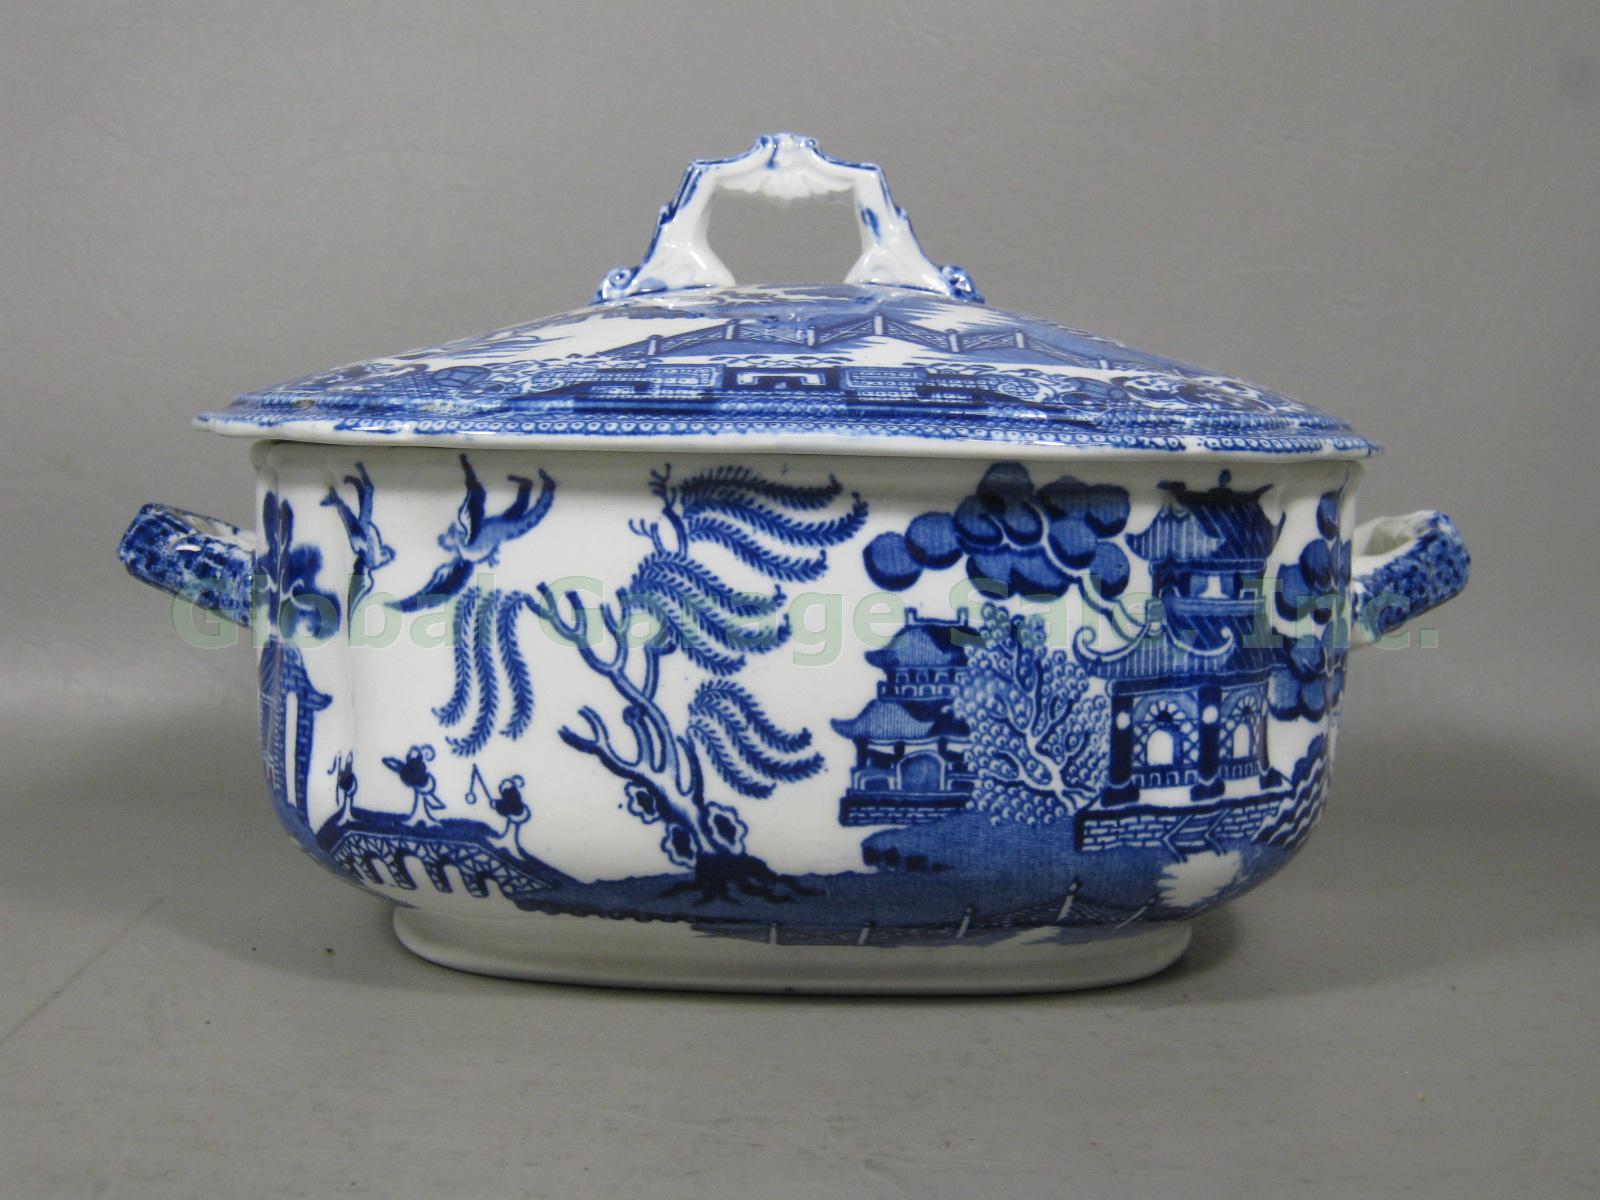 Antique Wedgwood Blue Willow 9" Soup Tureen + Ladle Transferware England EXC! NR 1